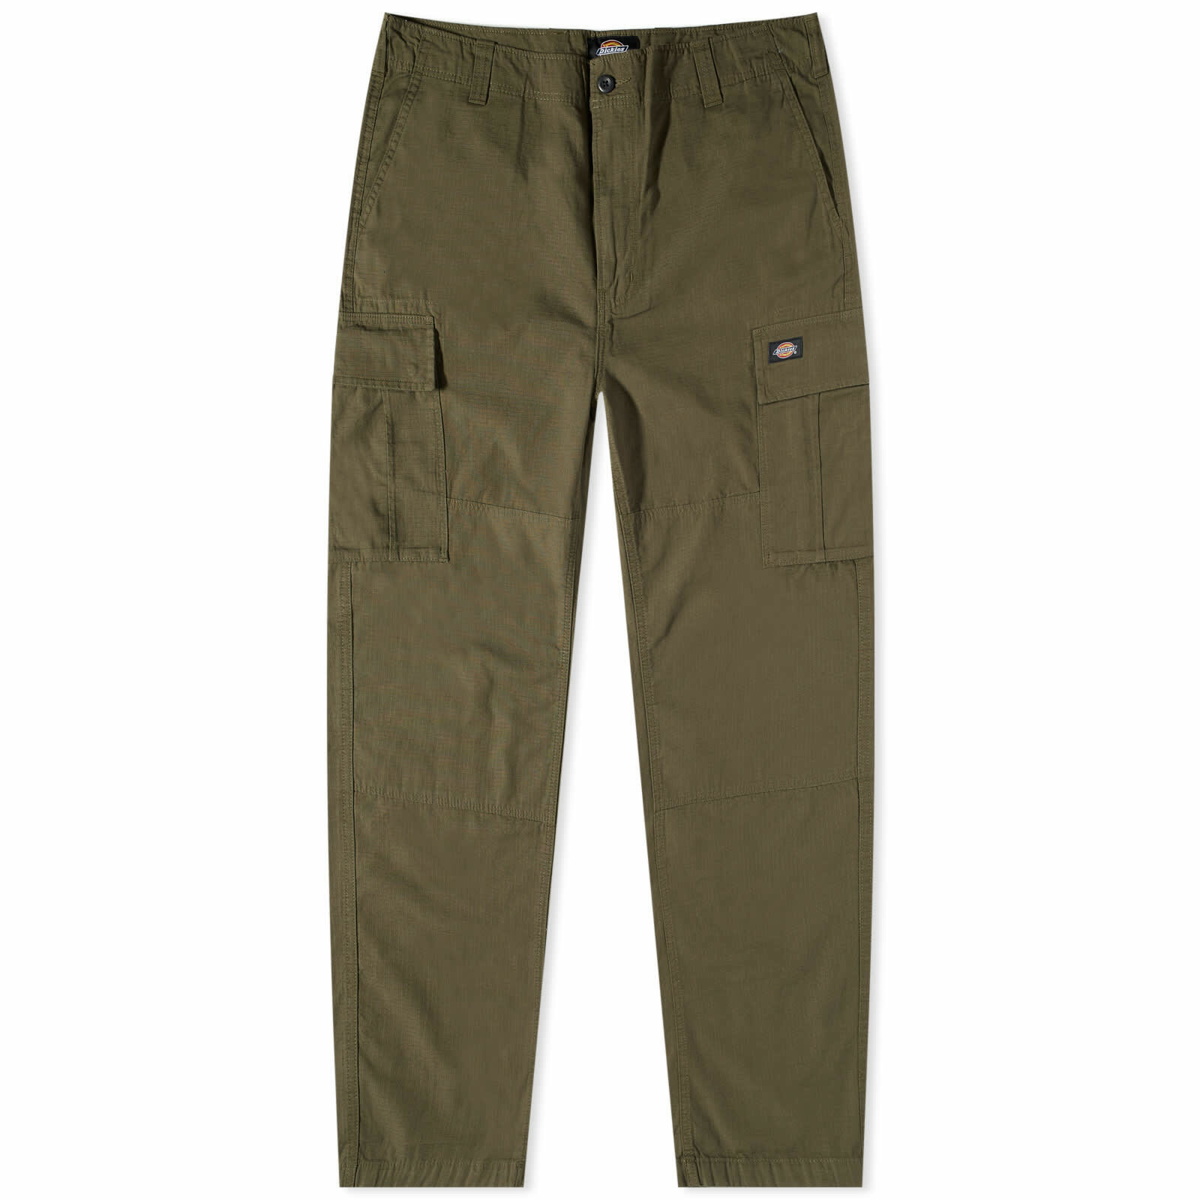 Dickies Men's Eagle Bend Cargo Pant in Military Green Dickies Construct